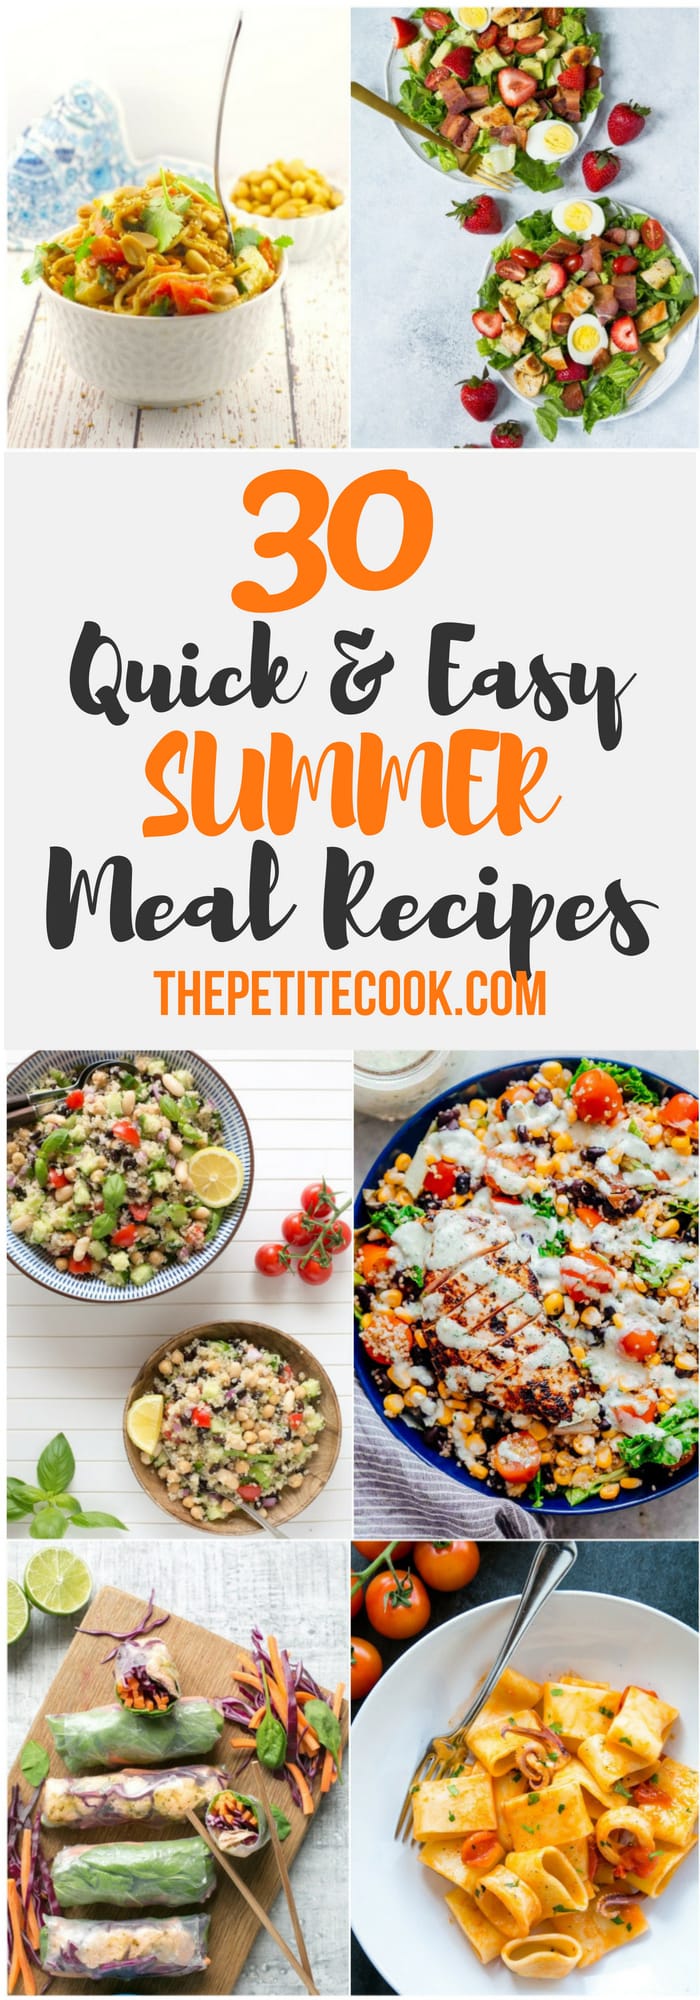 30 Quick & Easy Summer Meal Recipes - The Petite Cook